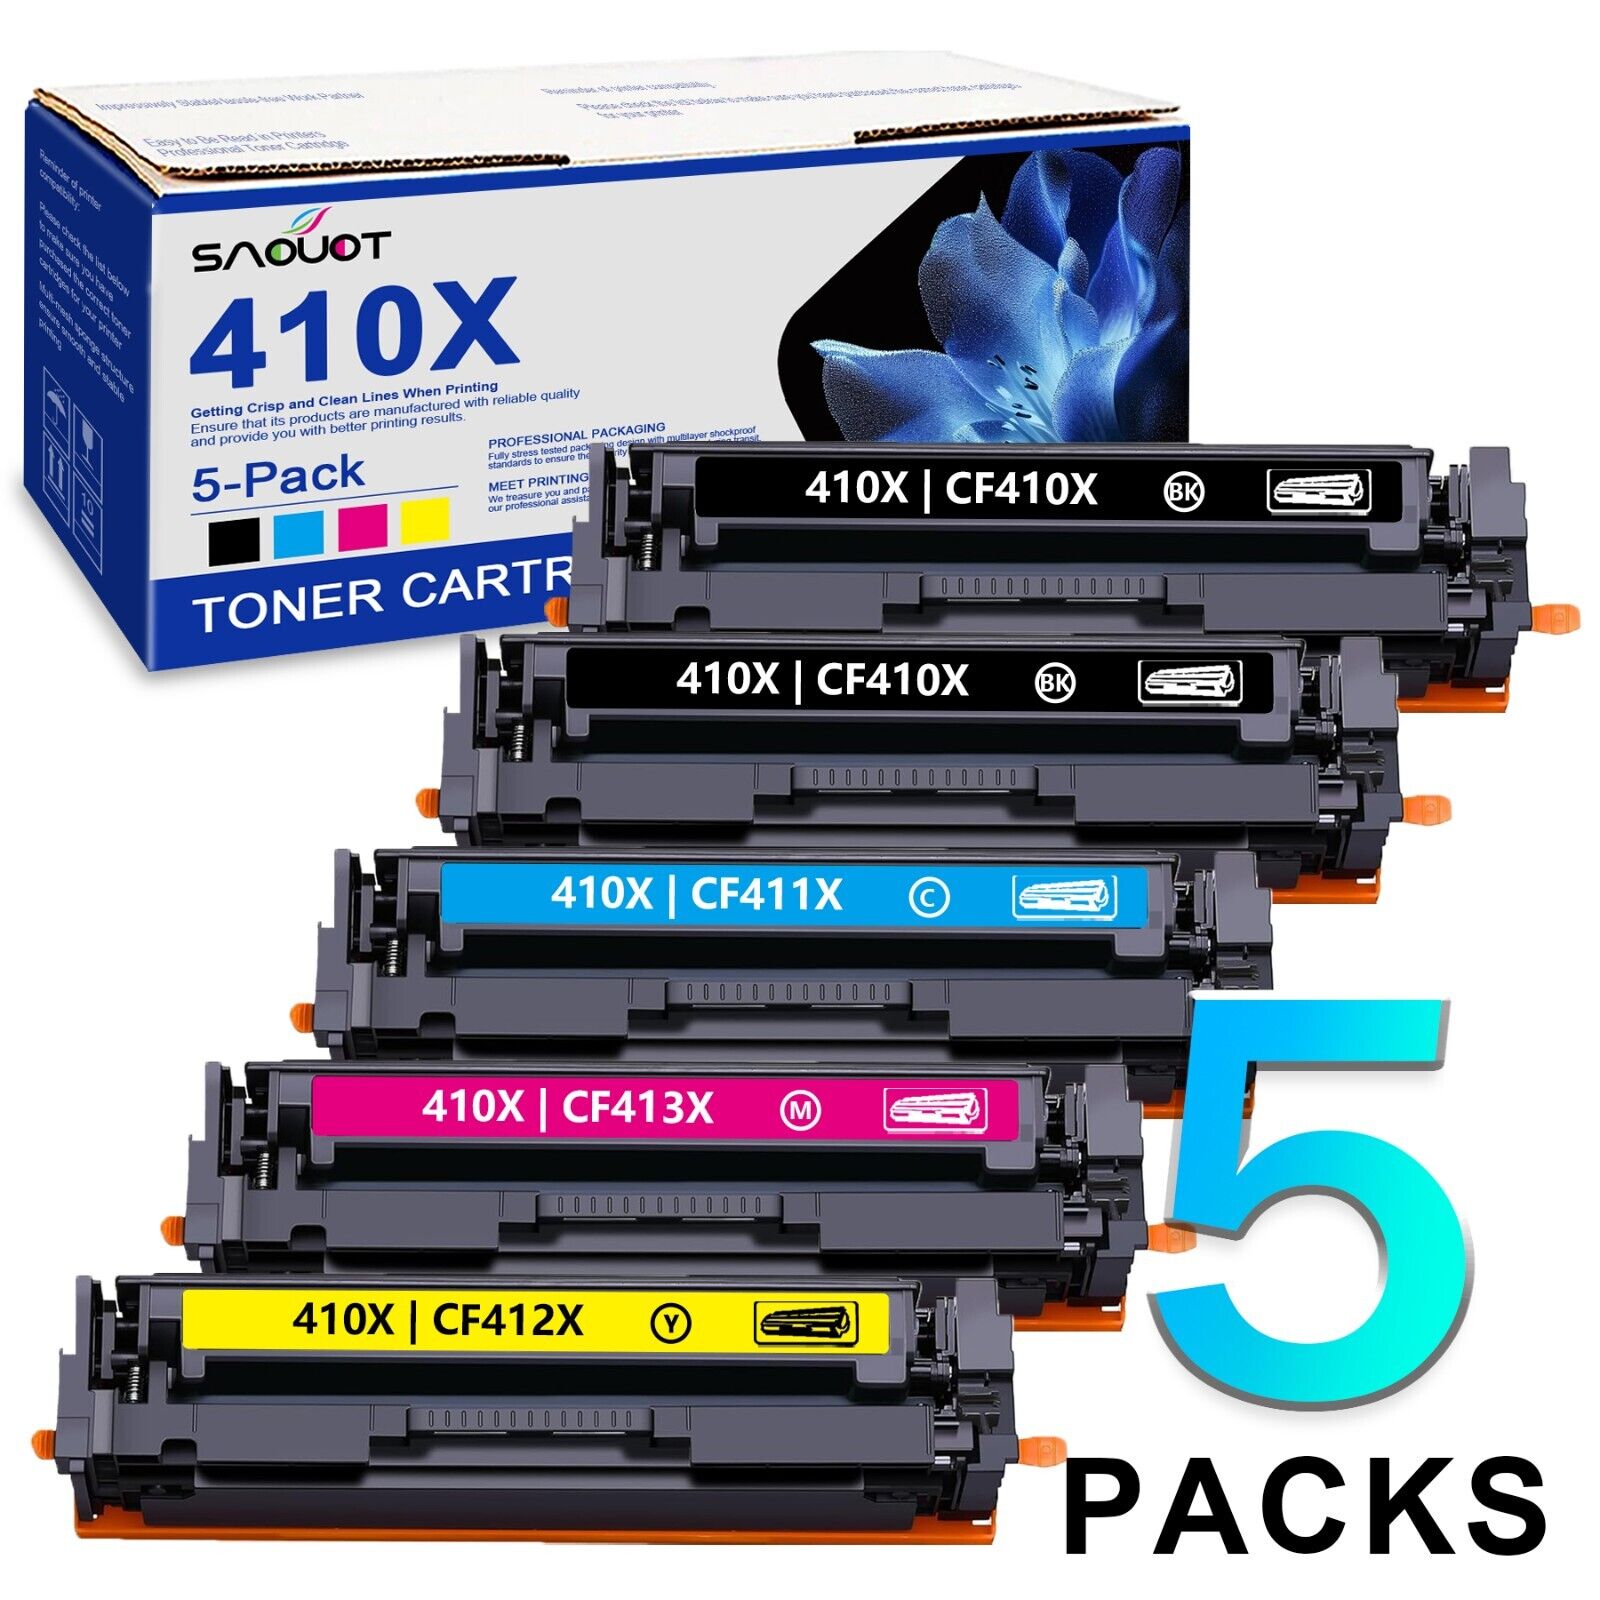 410X Toner Cartridge Replacement for HP Color Pro MFP M477fnw M477fdw M452dn